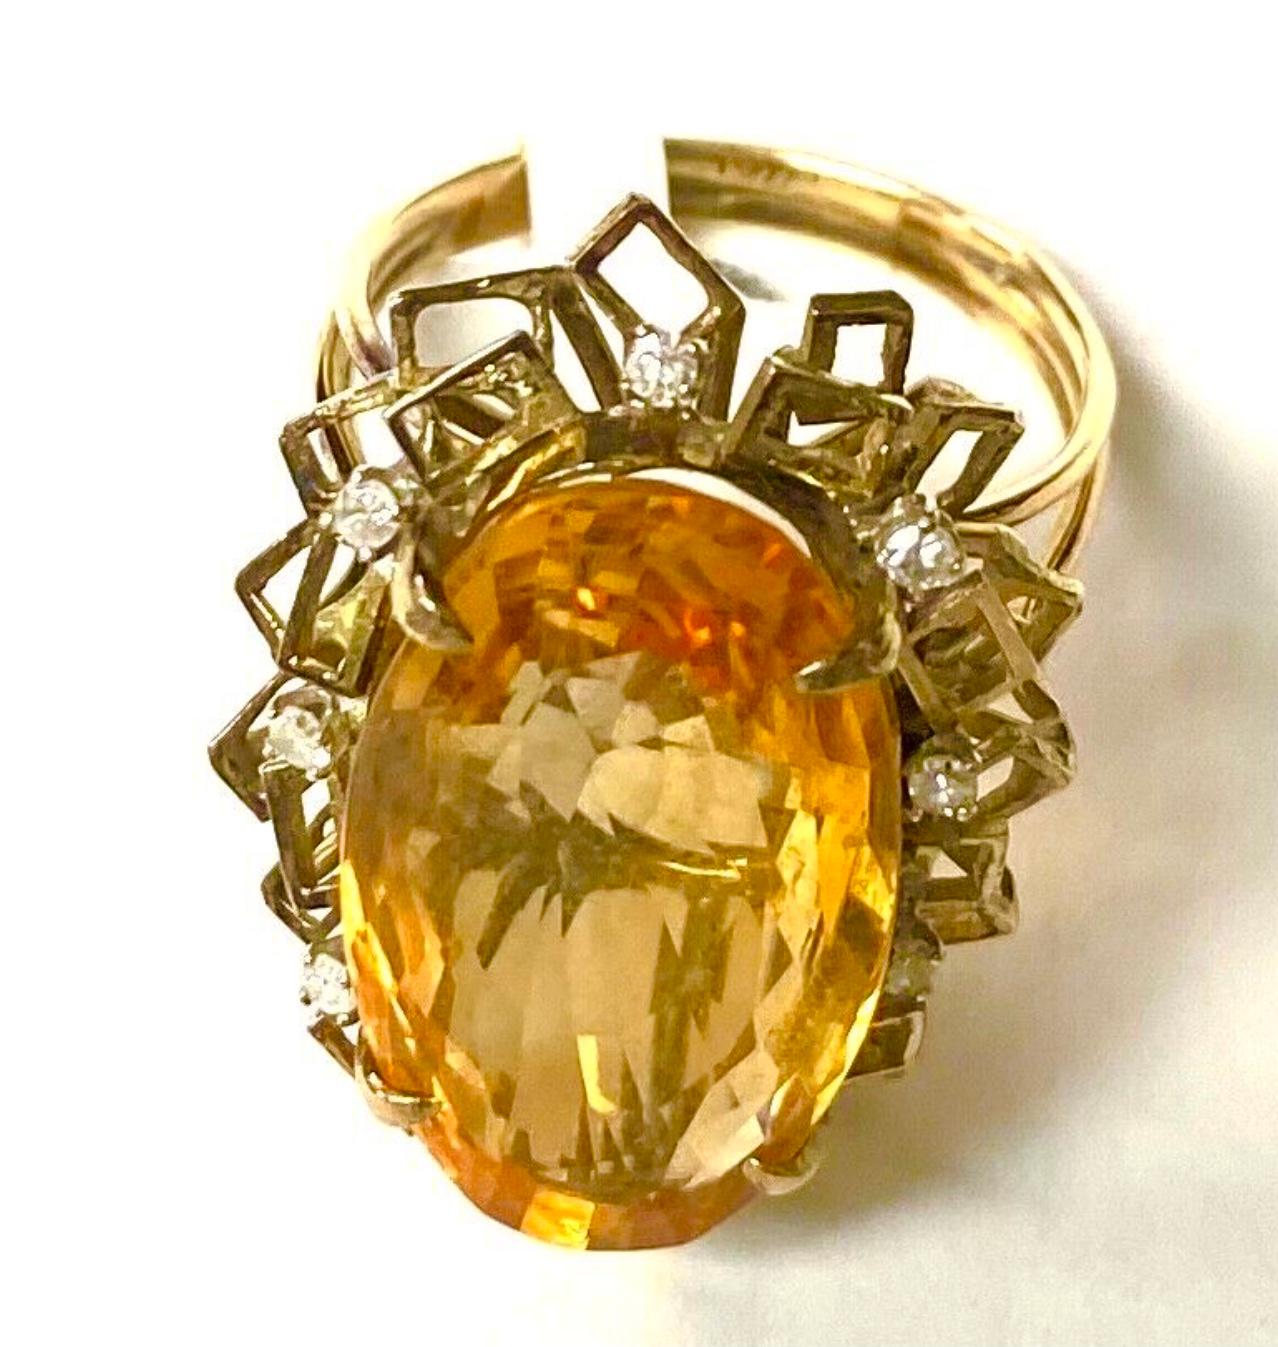 14k yellow gold Citrine and diamond ring, 10.32 Grams TW. The dimensions of the oval Citrine are approximately 30 mm x 15 mm. Approximately 15 carats. Marked14k. Approximate size 10.